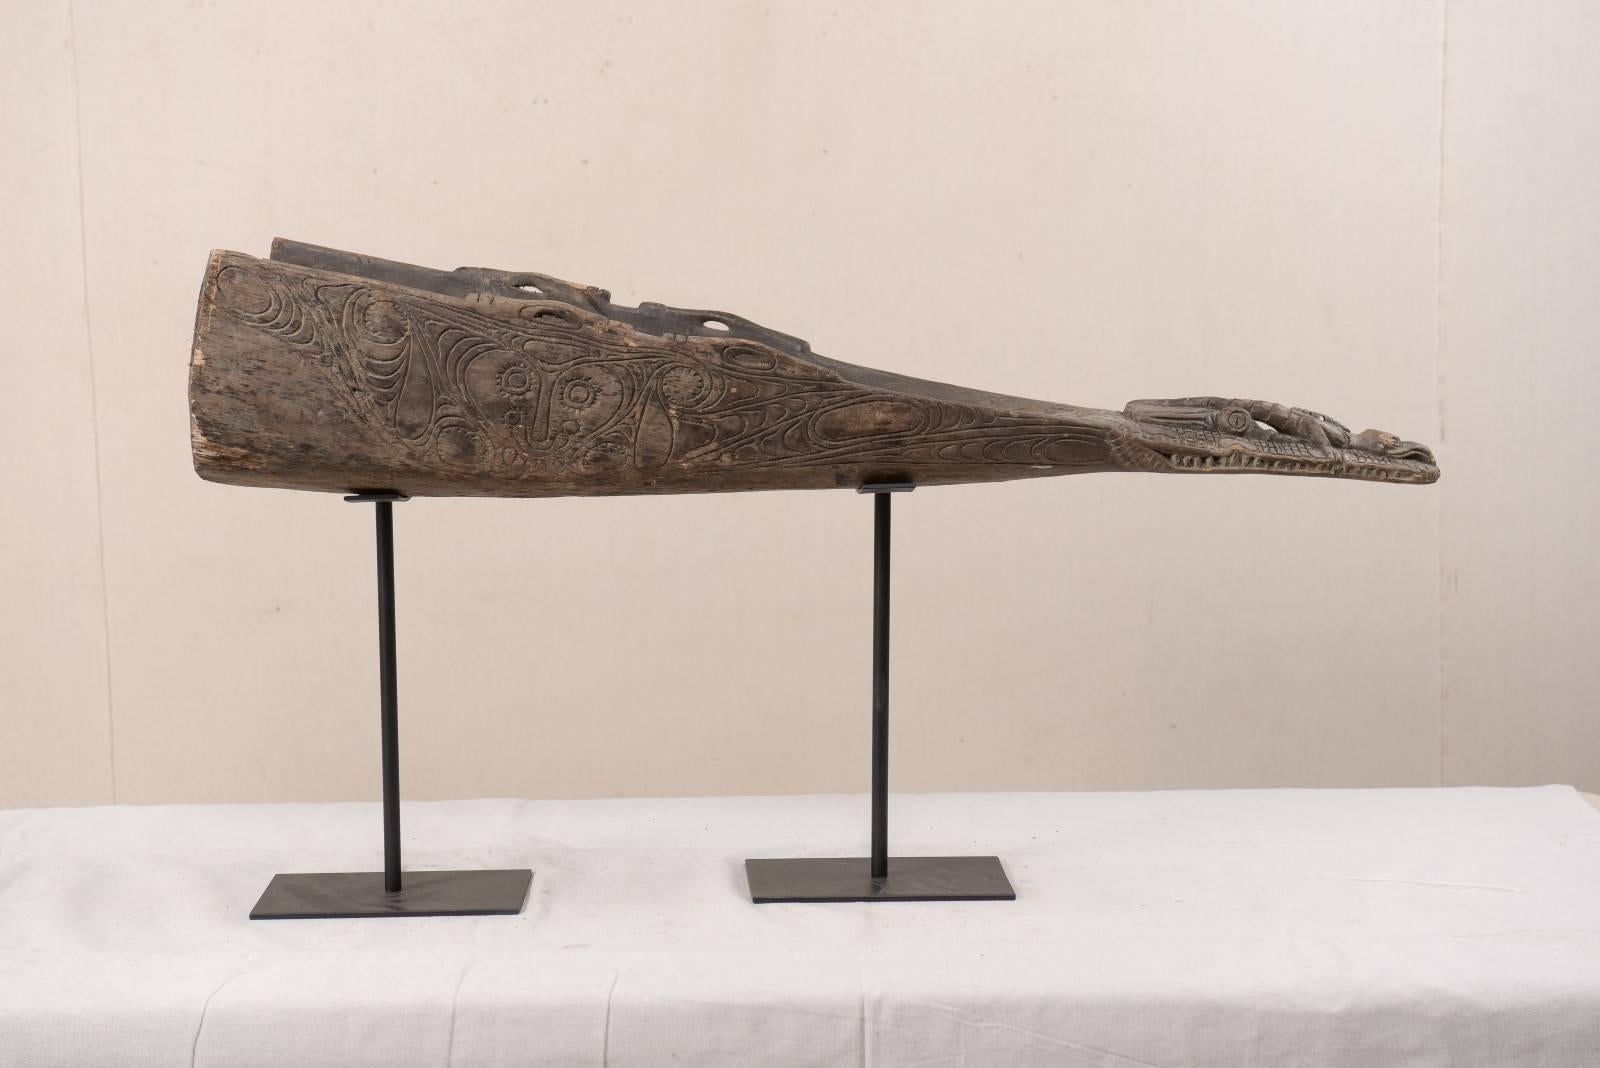 A carved wood crocodile head boat prow from Papua New Guinea. This mid-20th century Papua New Guinean boat prow has been carved out of wood and features the head of a crocodile. This boat prow is displayed and supported on two custom black iron